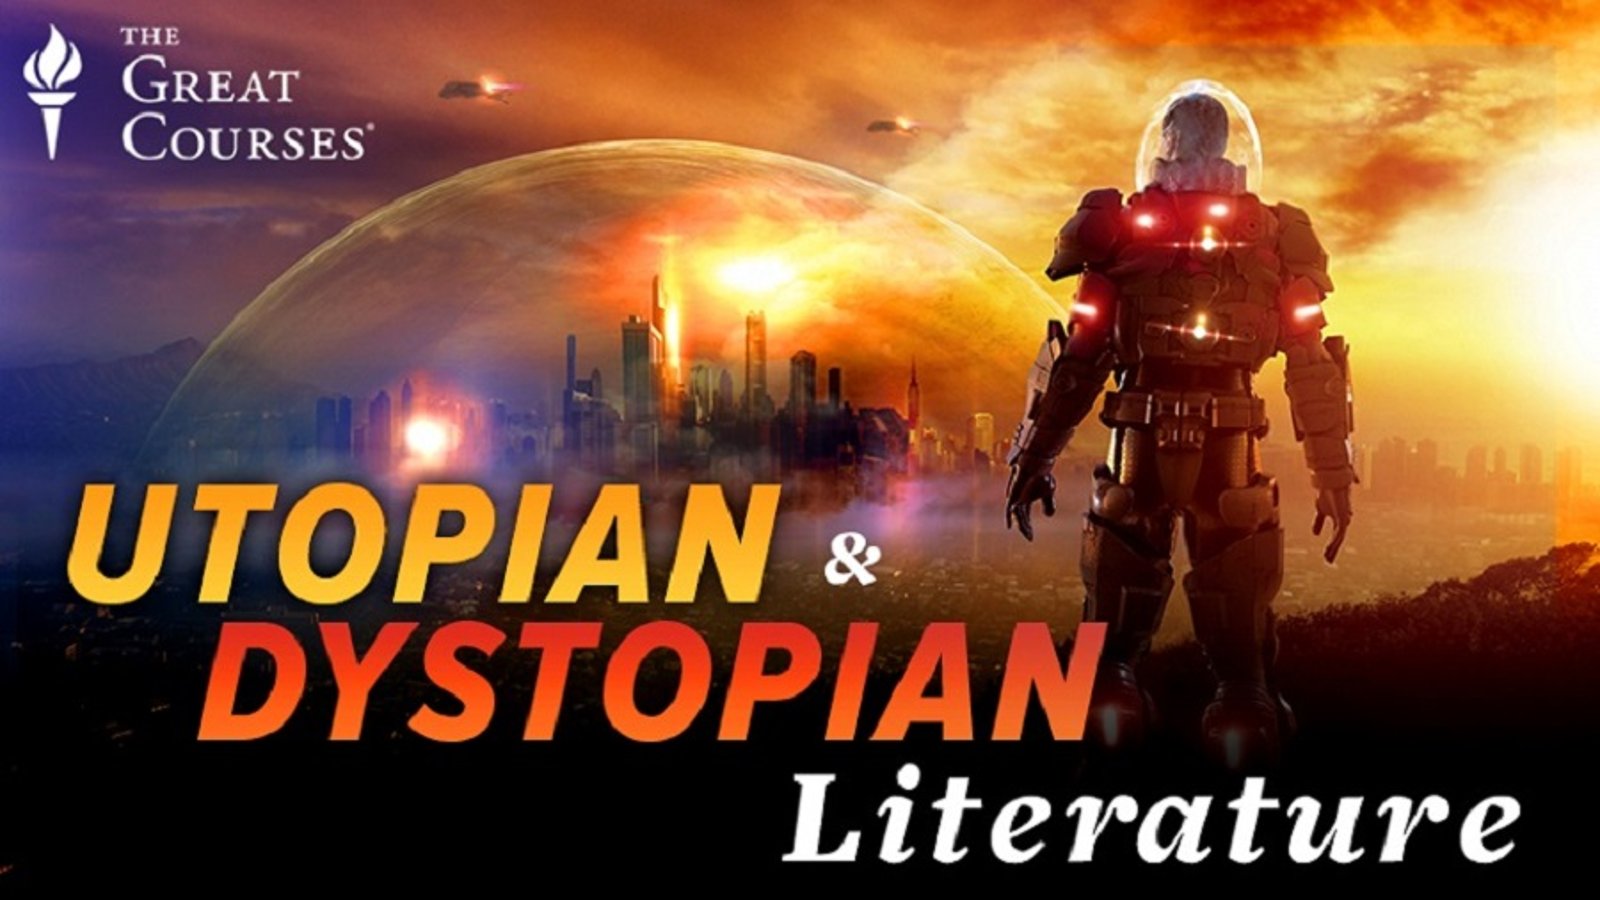 Great Utopian and Dystopian Works of Literature